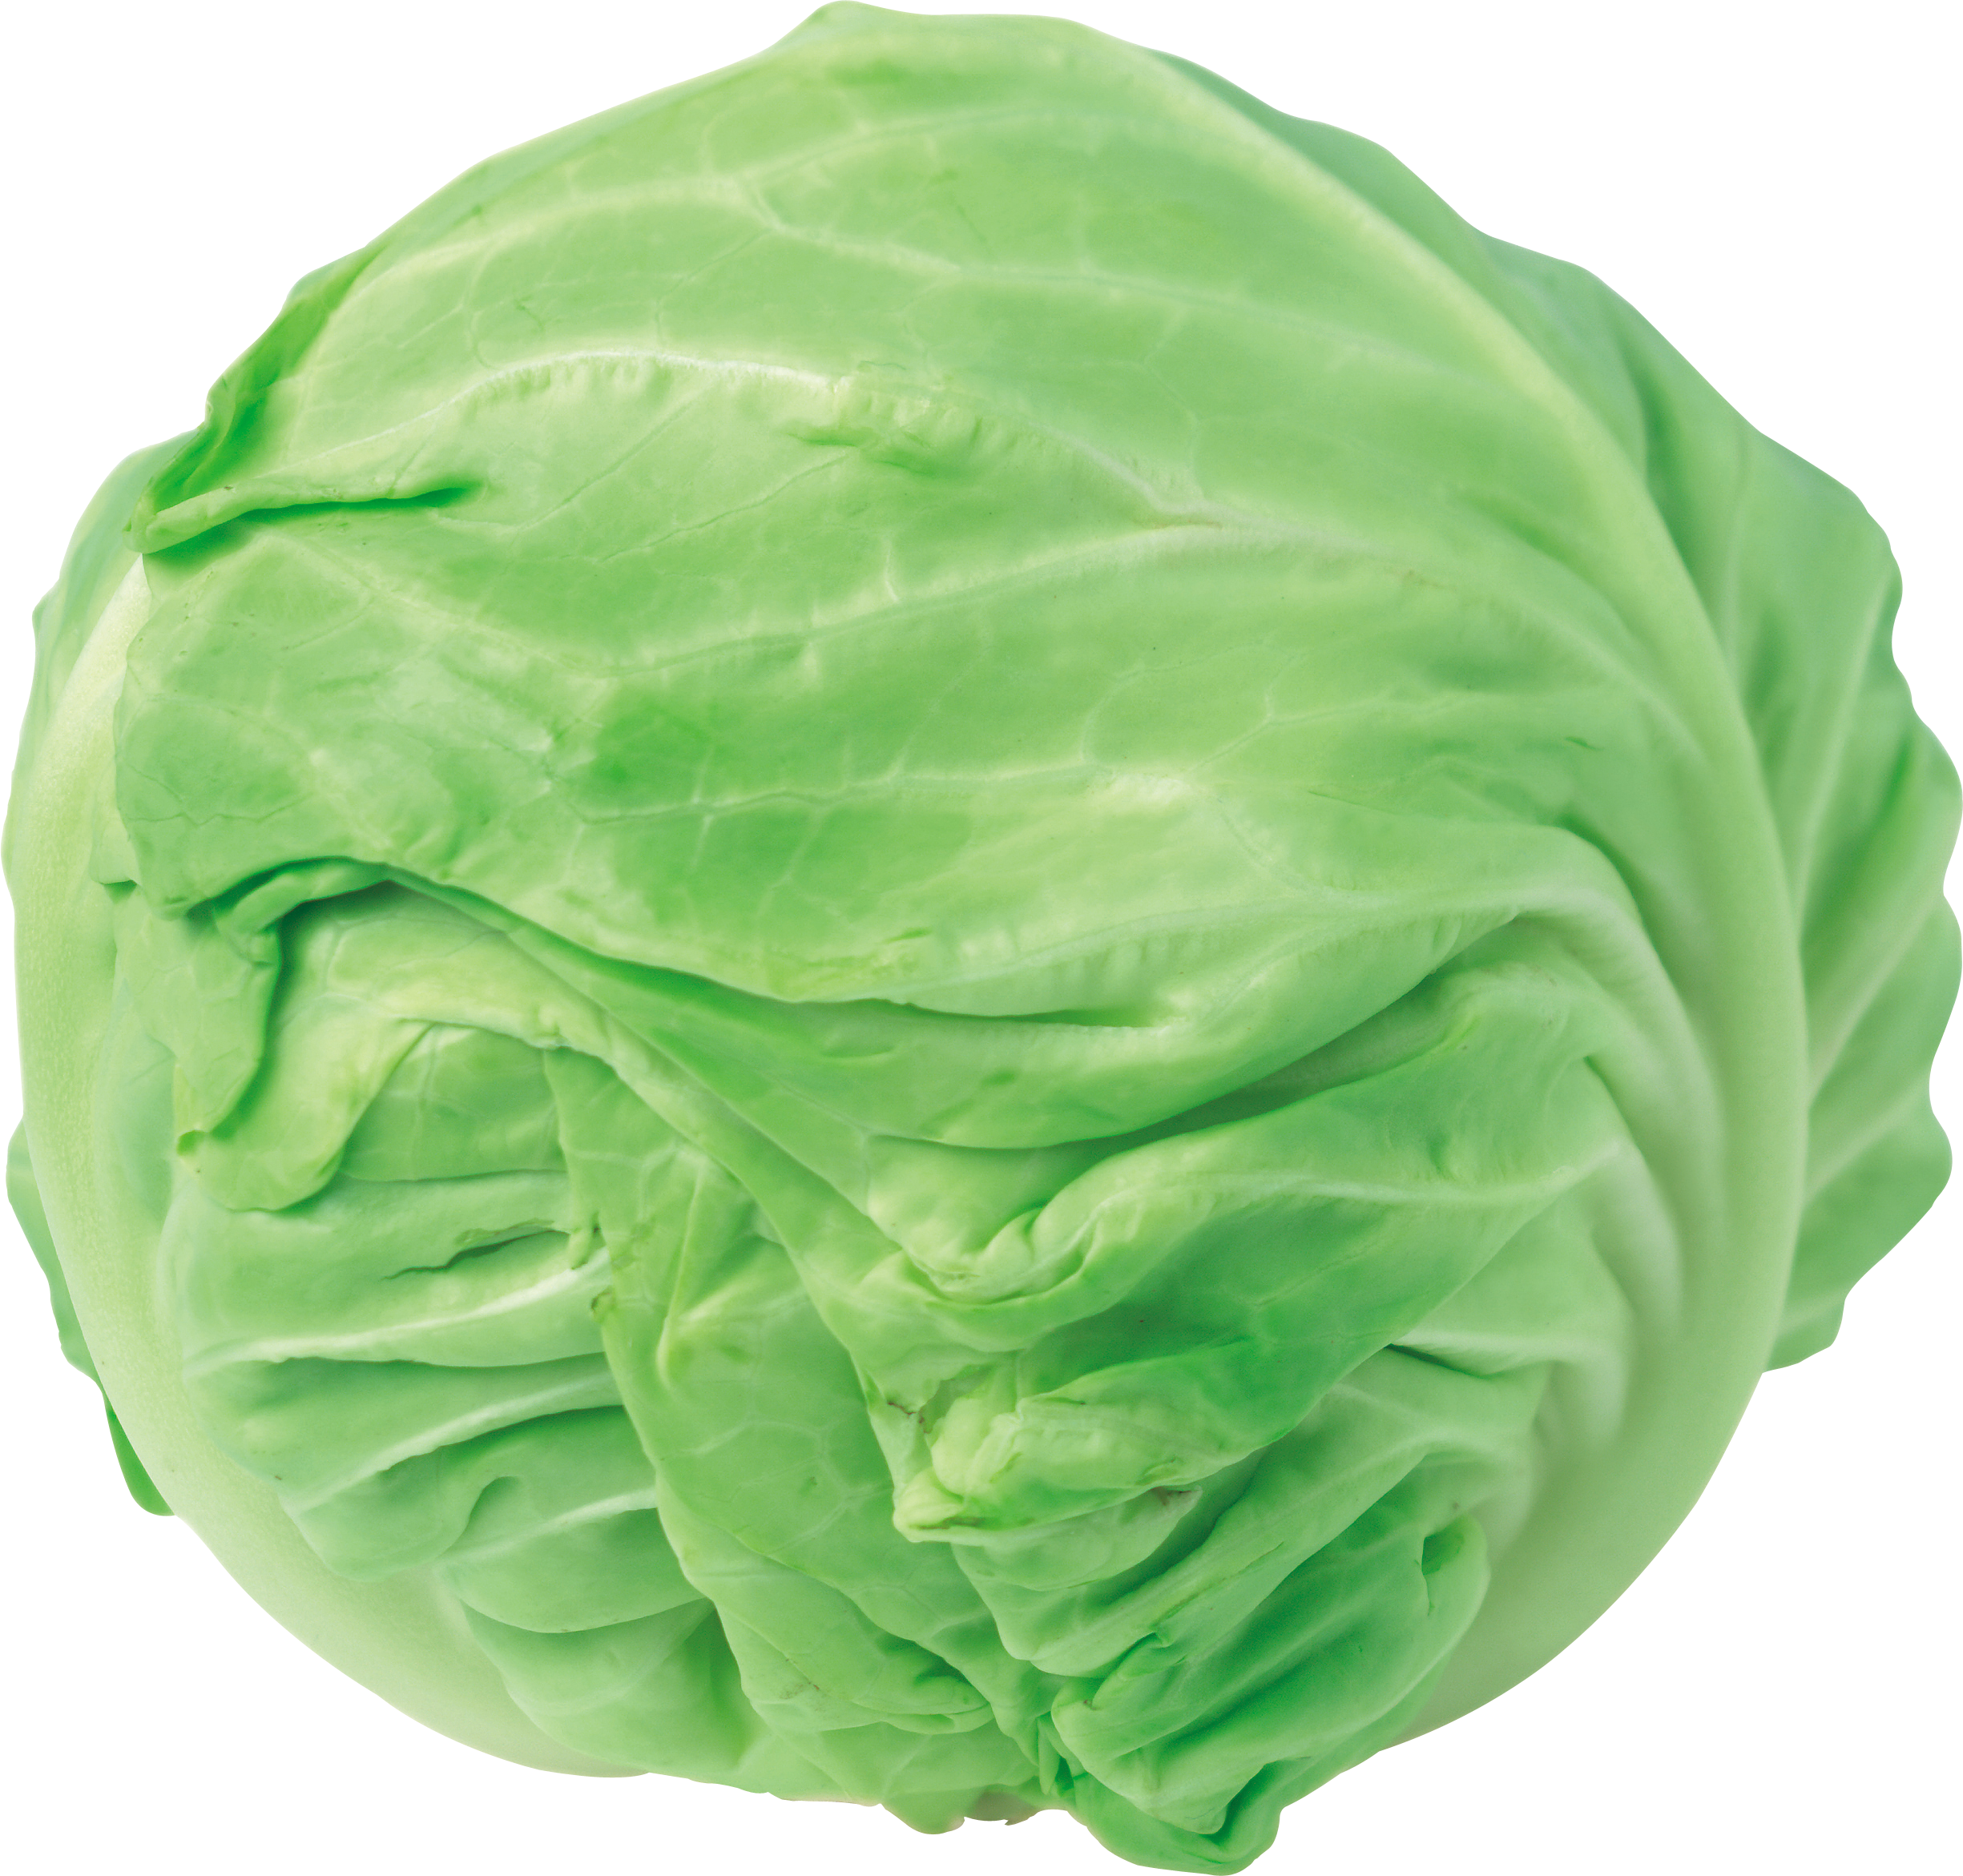 Lettuce clipart ice burg. Cabbage png image free